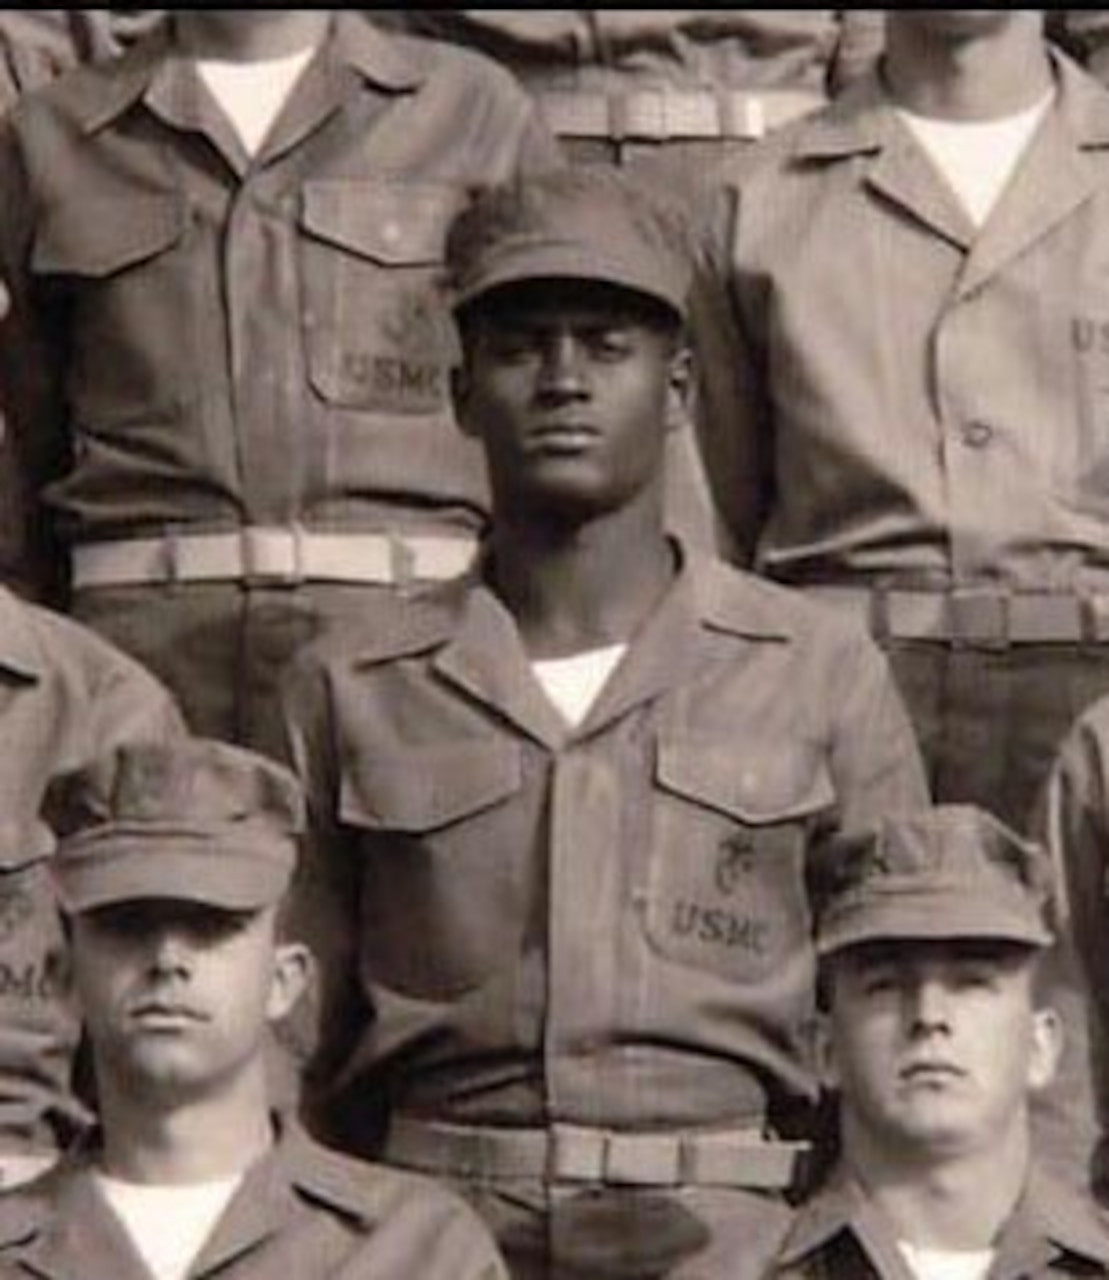 A young Marine faces the camera in a group photo.